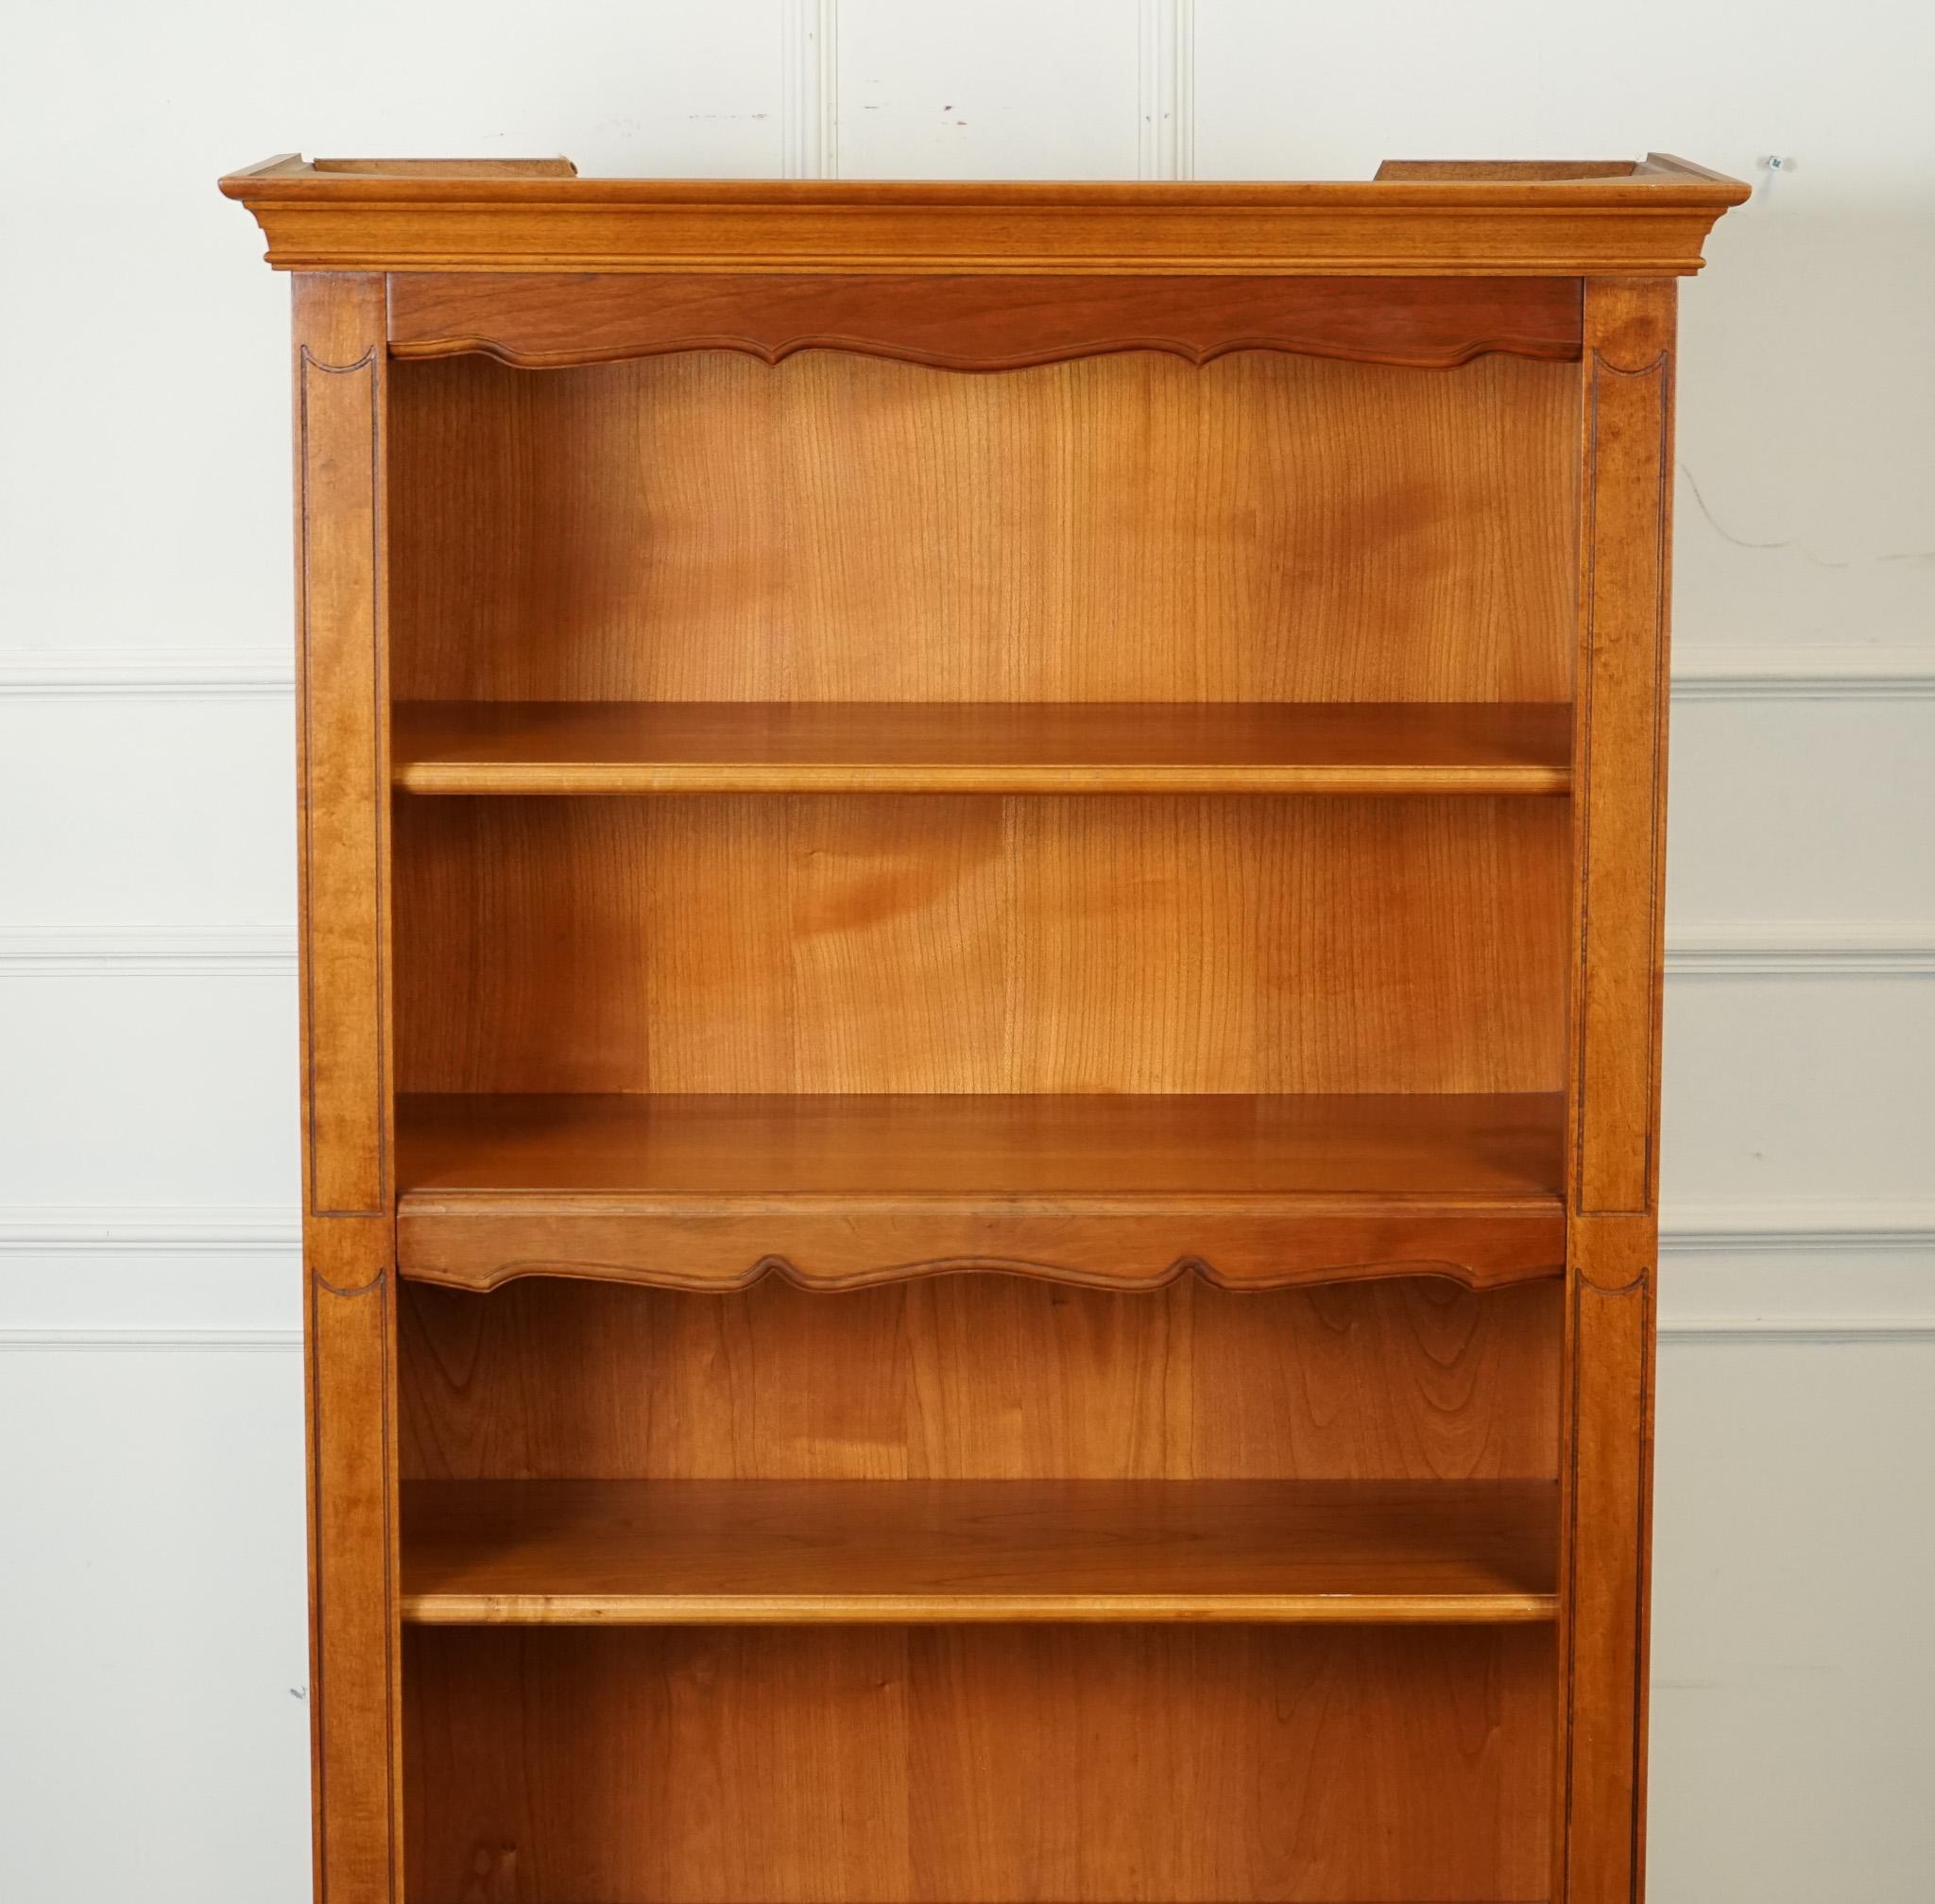 20th Century VINTAGE TALL OPEN SOLID BOOKCASE 5 SHELVES MADE BY YOUNGER FURNITURE LONDON j1 For Sale